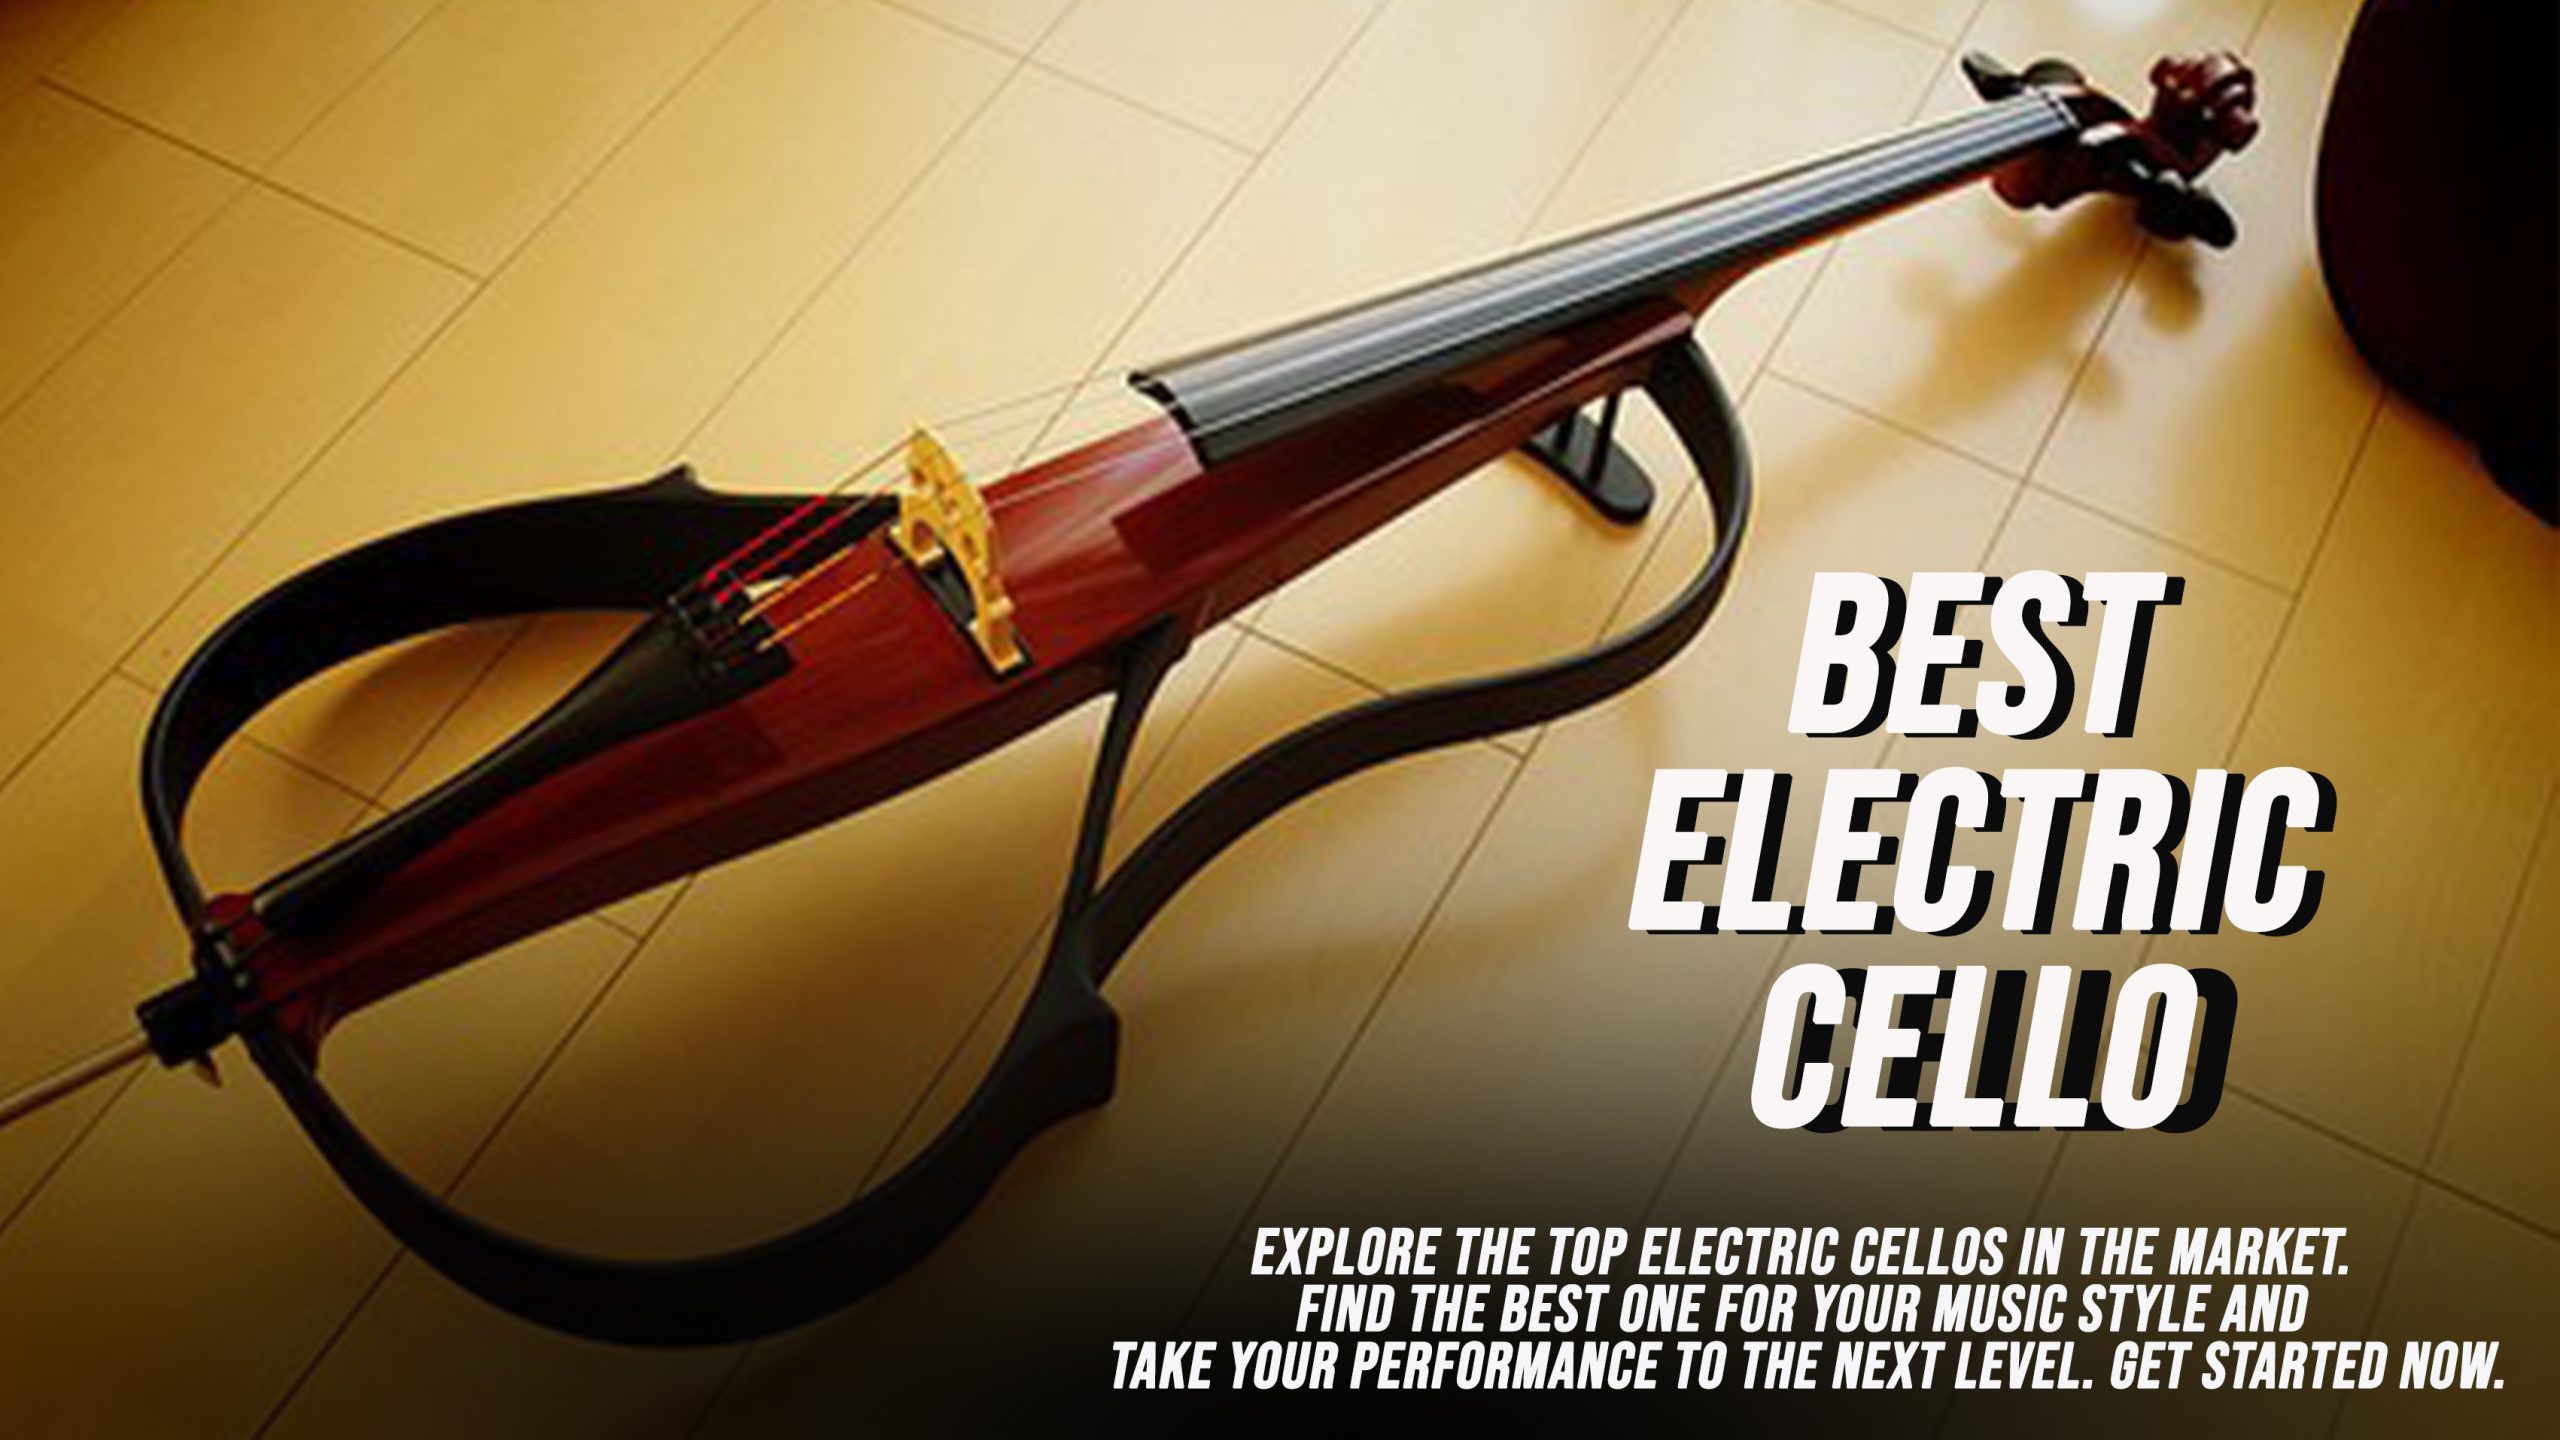 Best Electric Cello